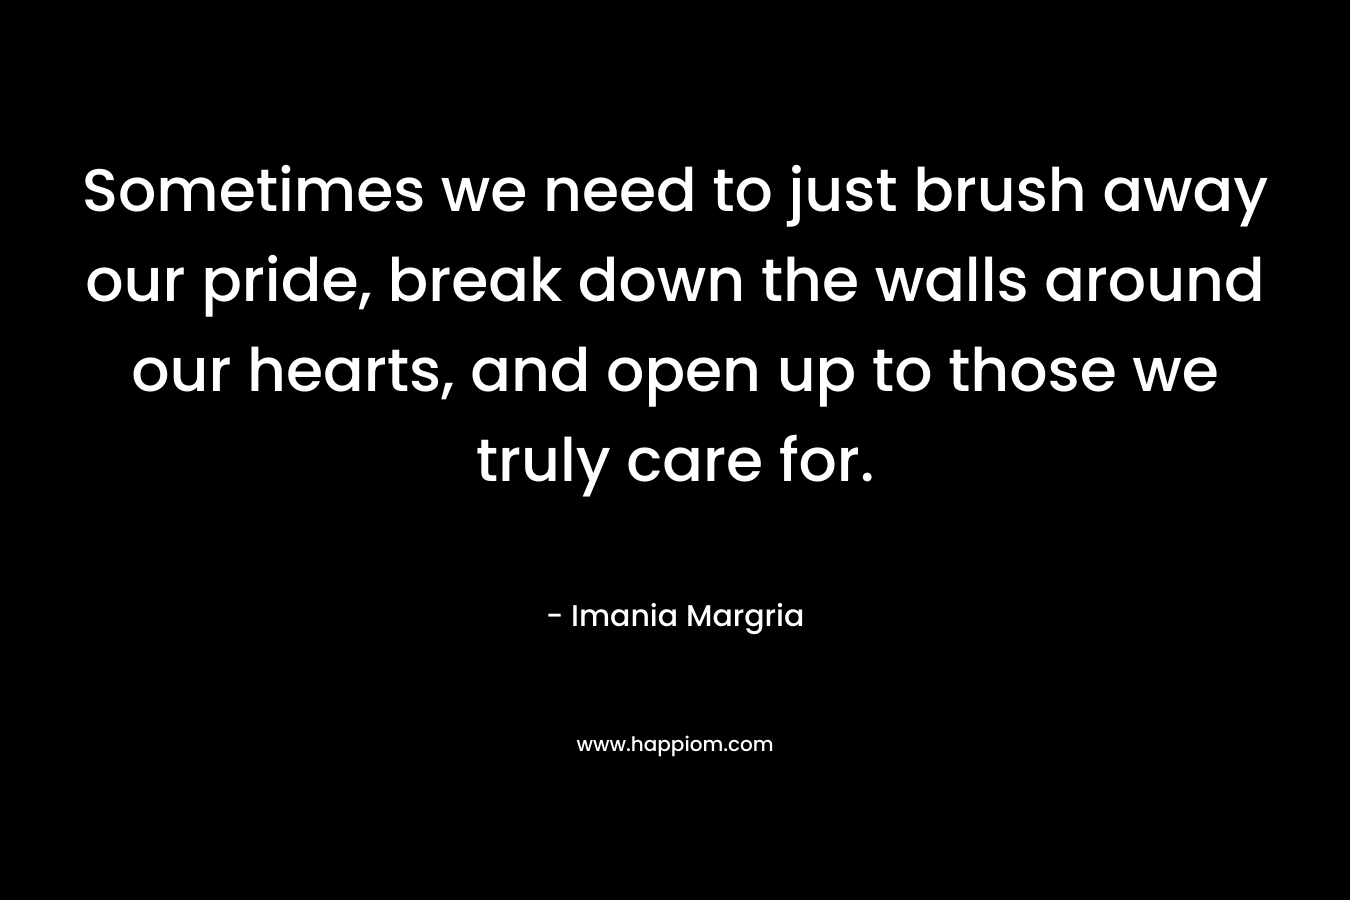 Sometimes we need to just brush away our pride, break down the walls around our hearts, and open up to those we truly care for.